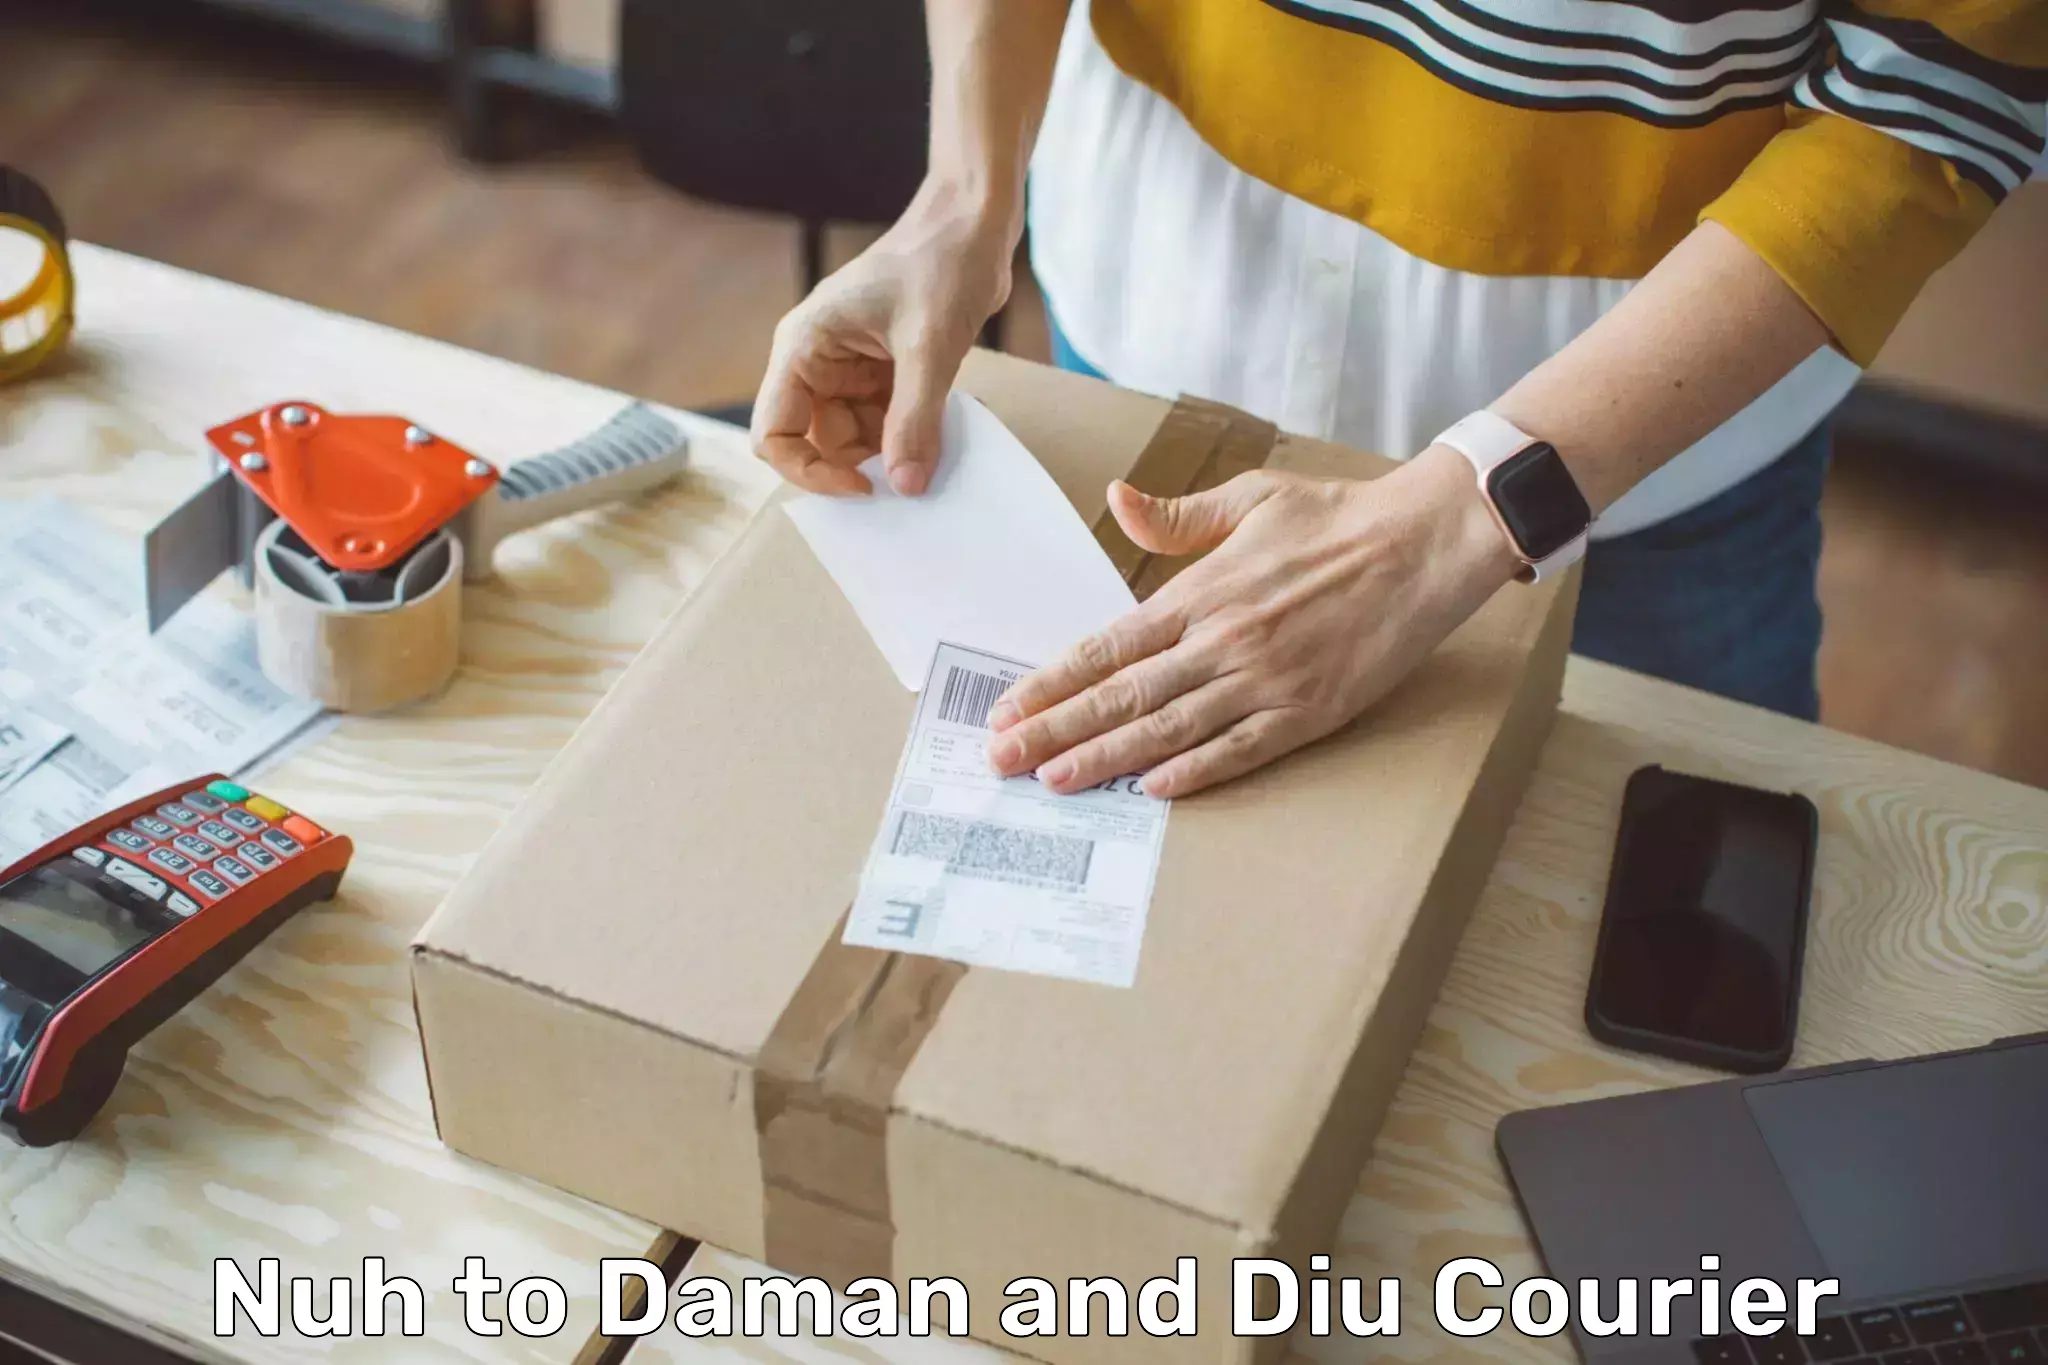 Courier service efficiency Nuh to Daman and Diu